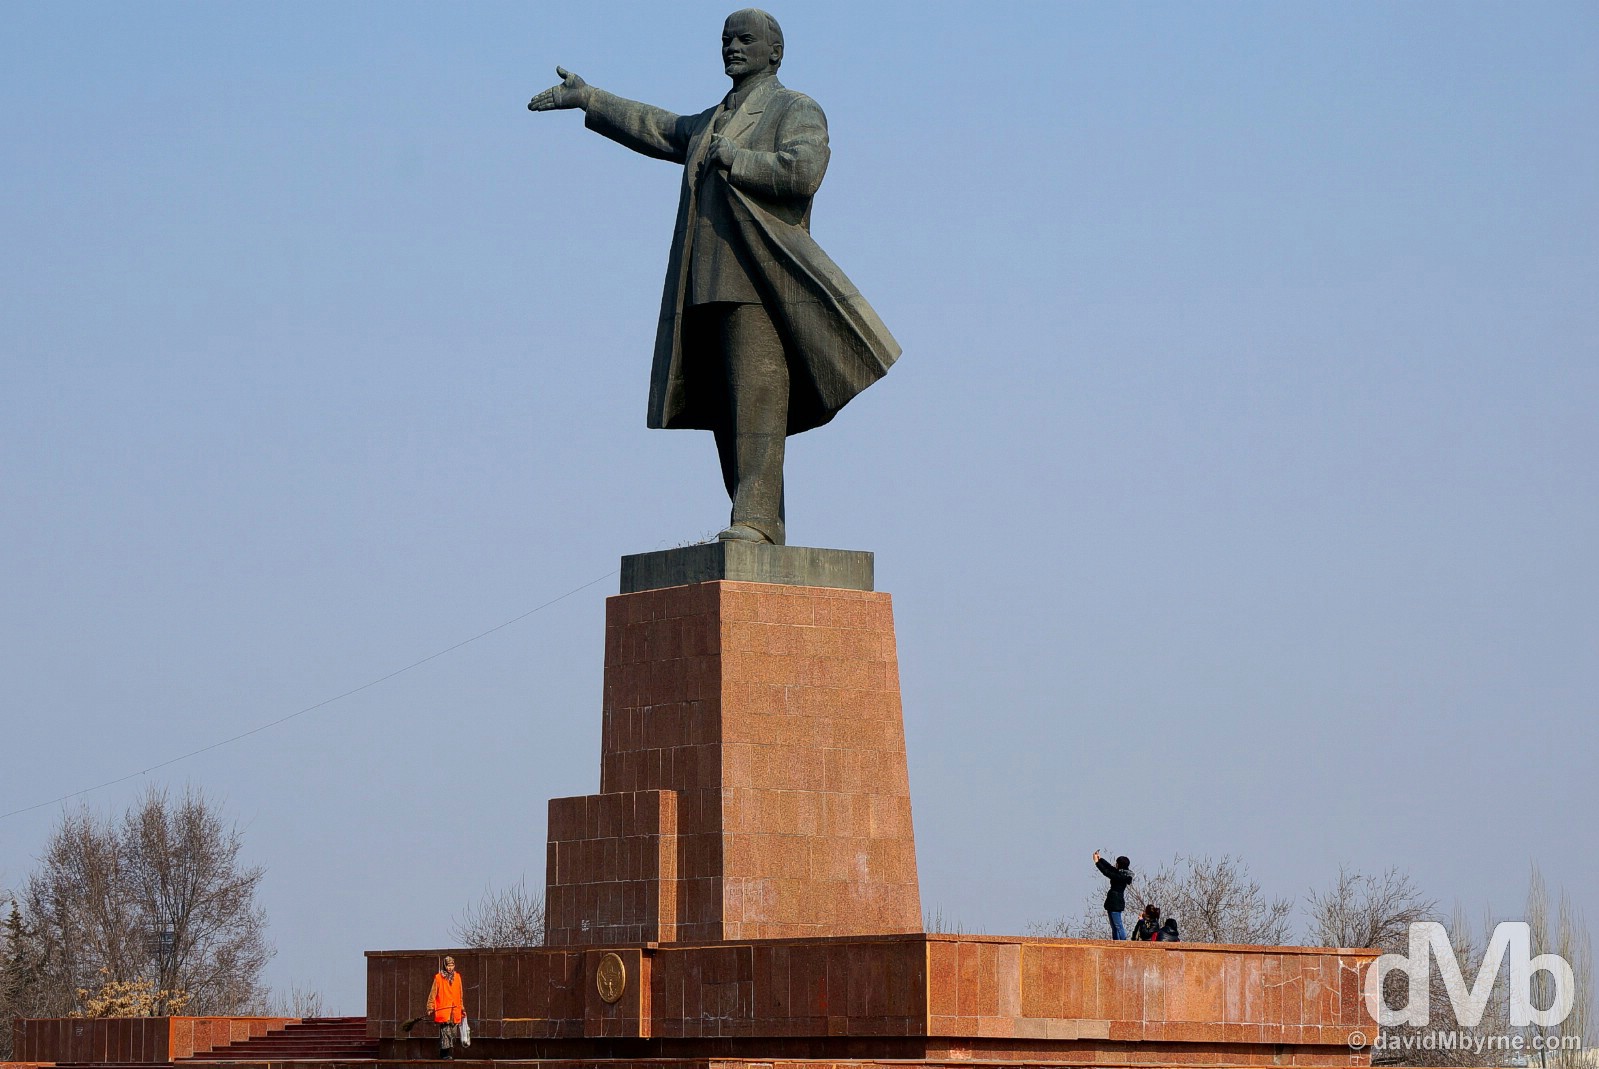 The Lenin Statue in Osh, southern Kyrgyzstan. March 3, 2015. 